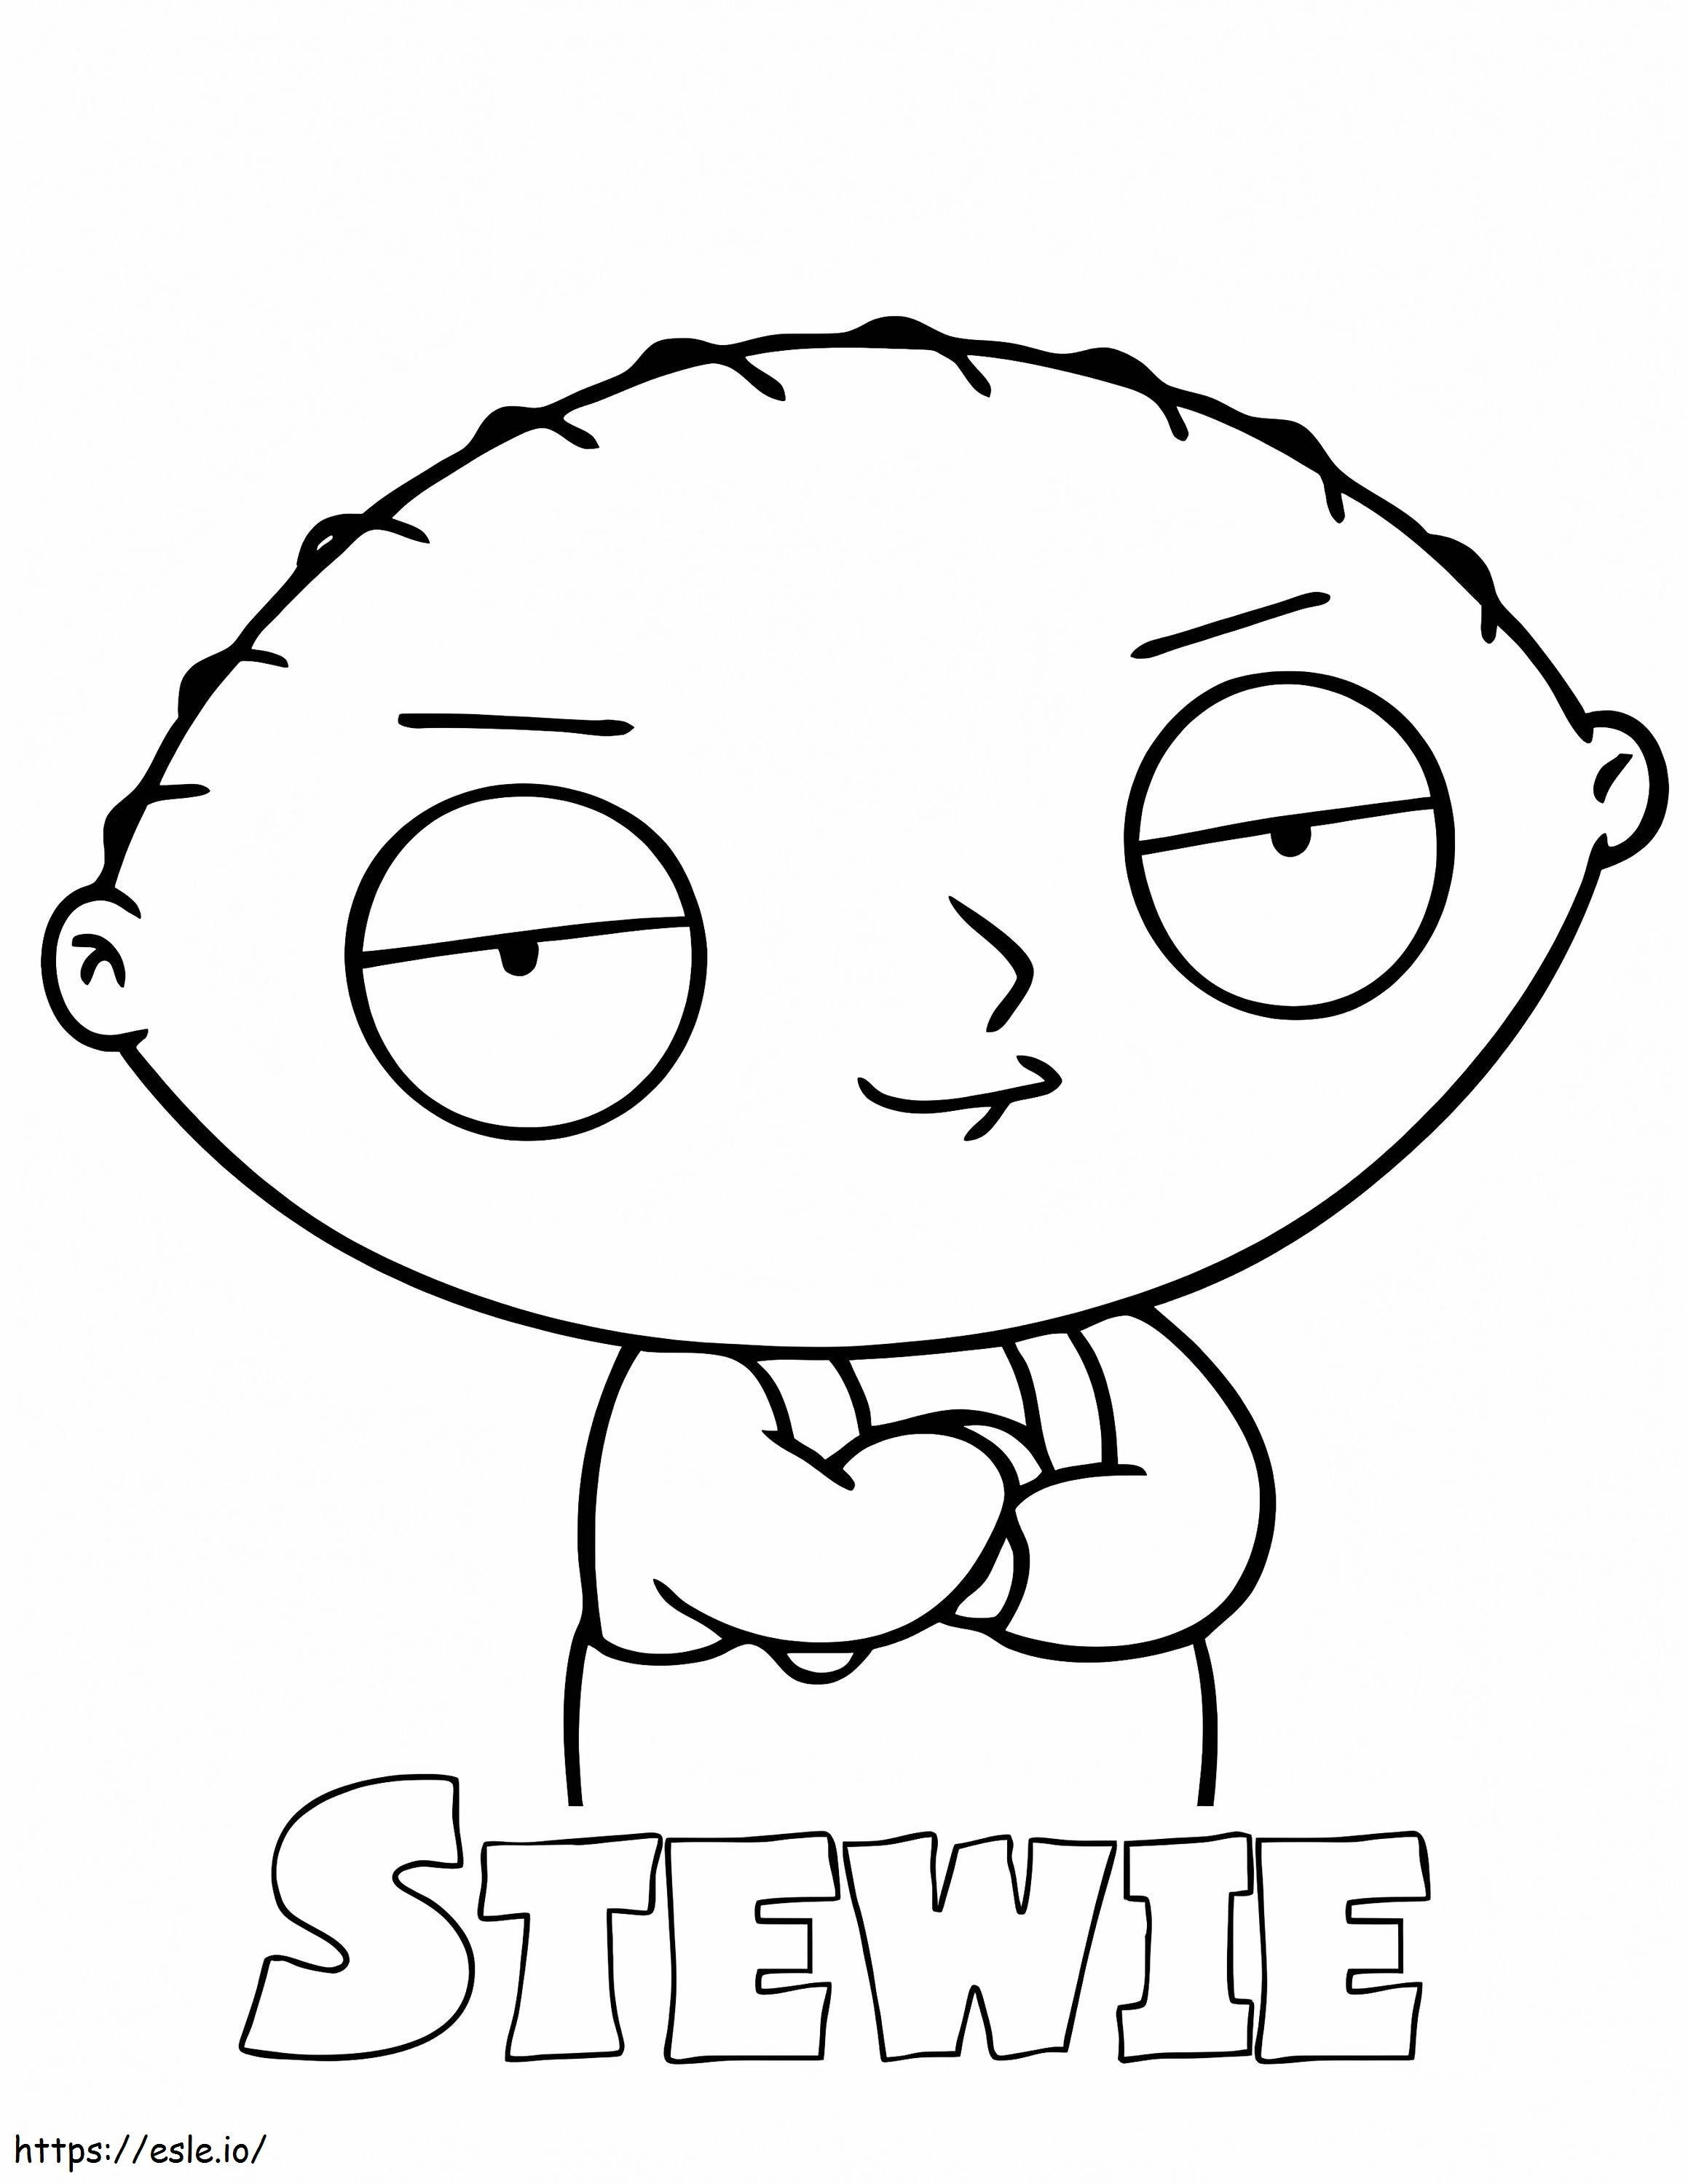 Stewie Griffin 1 coloring page